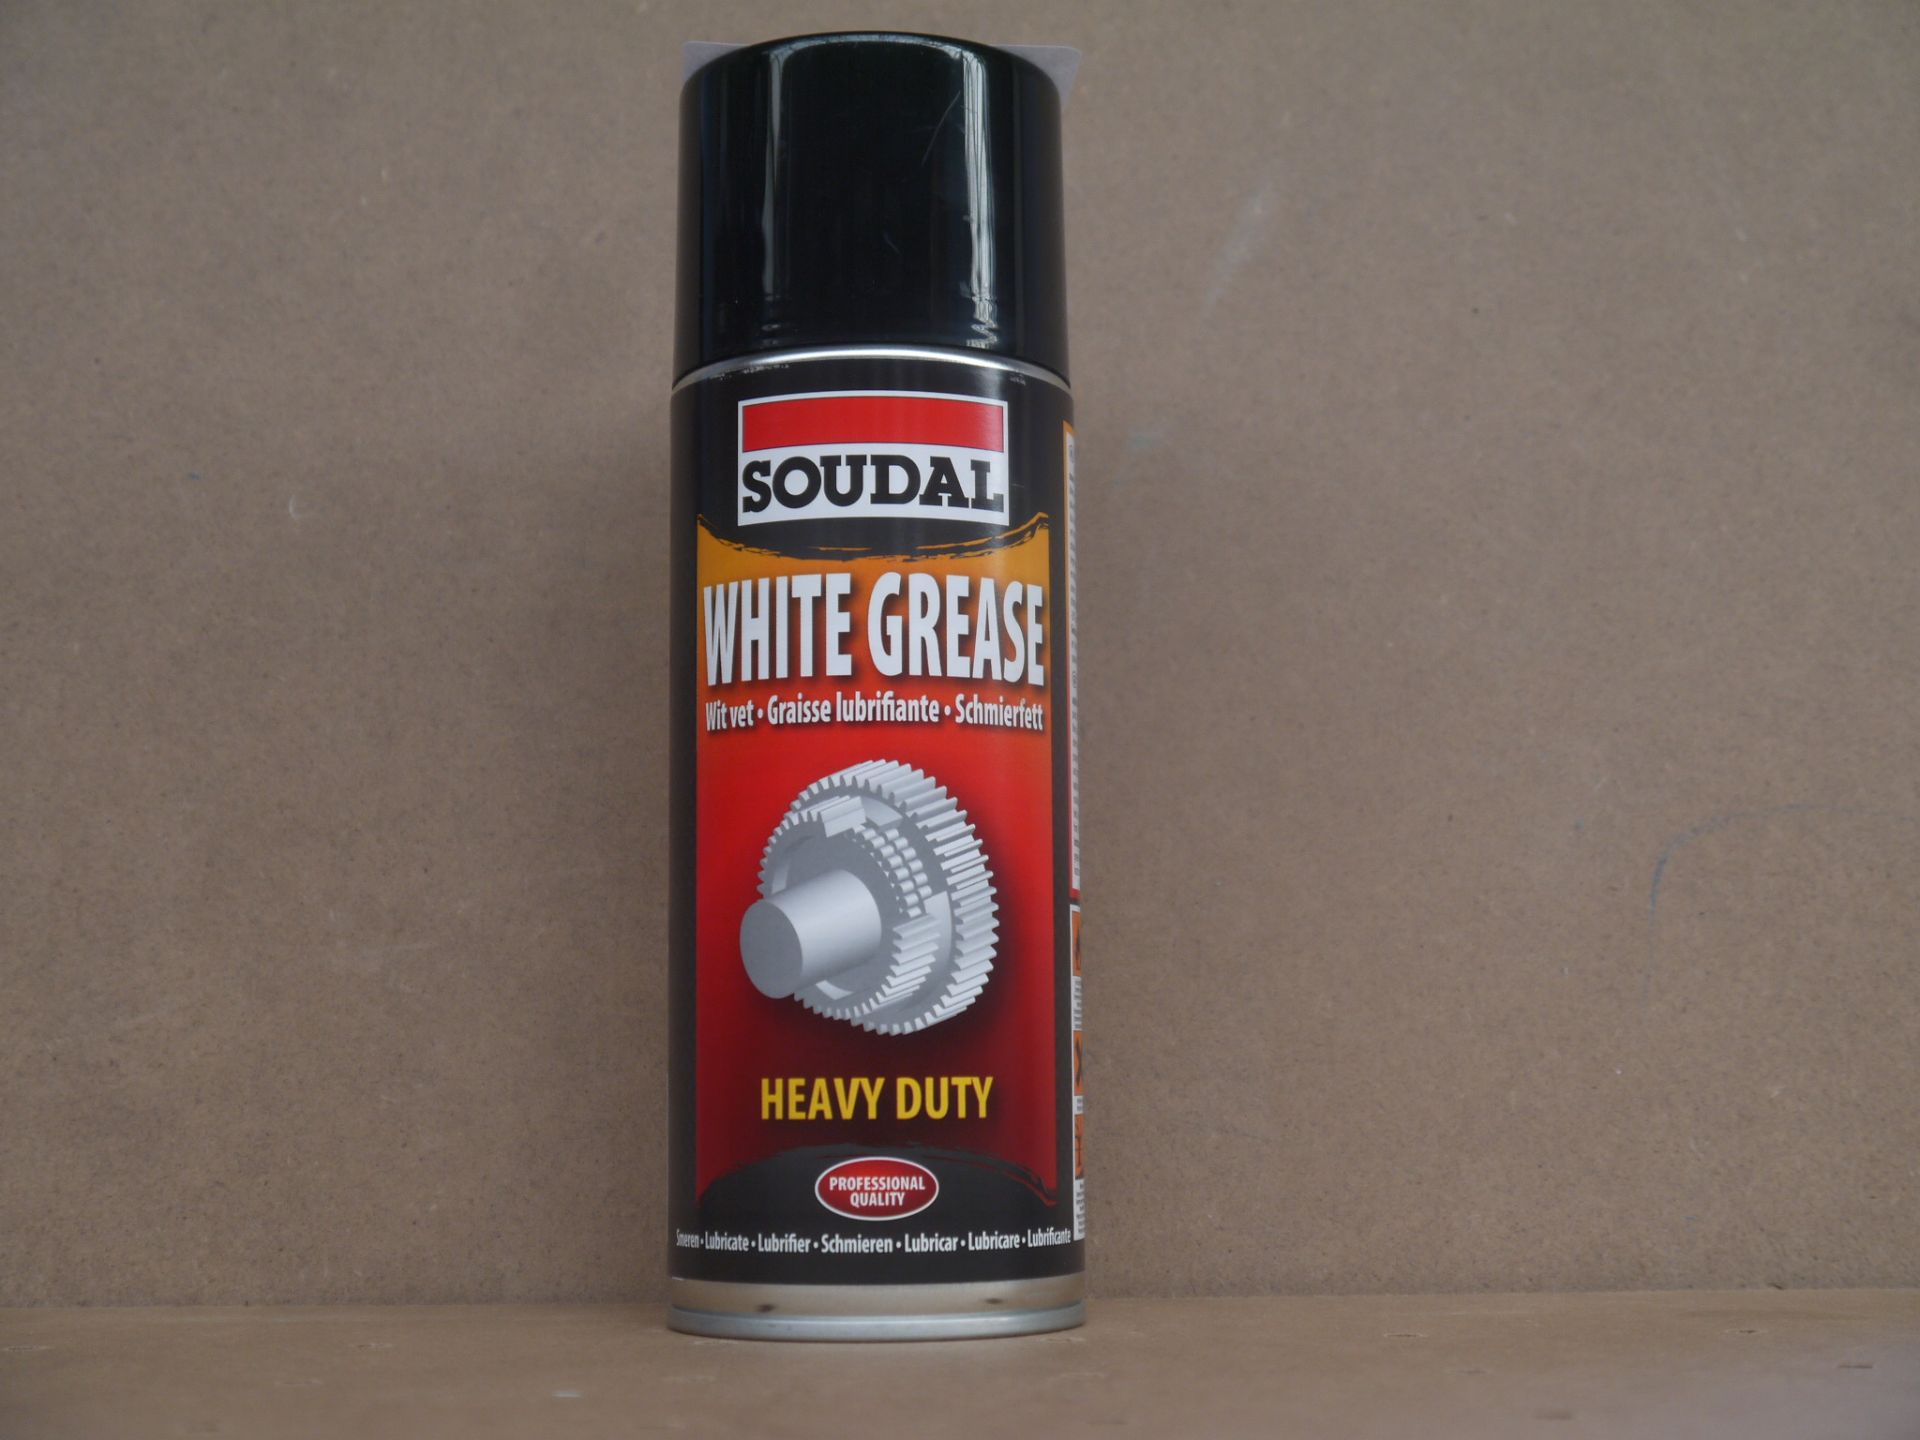 3x 400 ml of SOUDAL White Grease. New